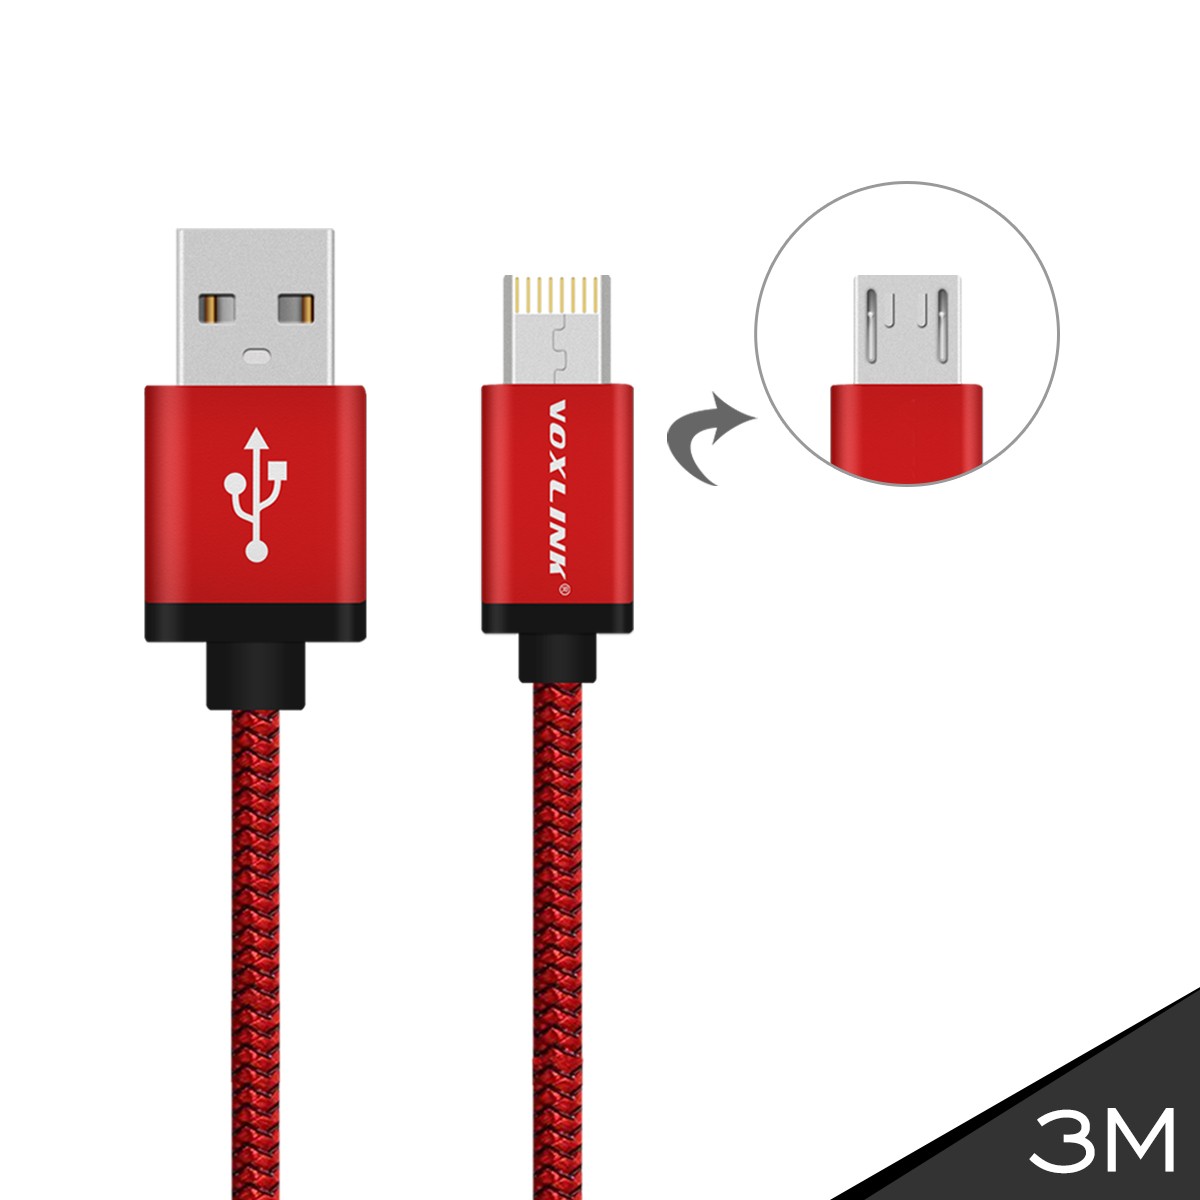 VOXLINK 2 in 1 Charging Cable Metal Nylon Line Micro 8Pin USB Data Cable for iPhone 6 5s 6s Plus for Samsung S7 S6 edge Huawei Xiaomi Meizu Android  red 0.5m